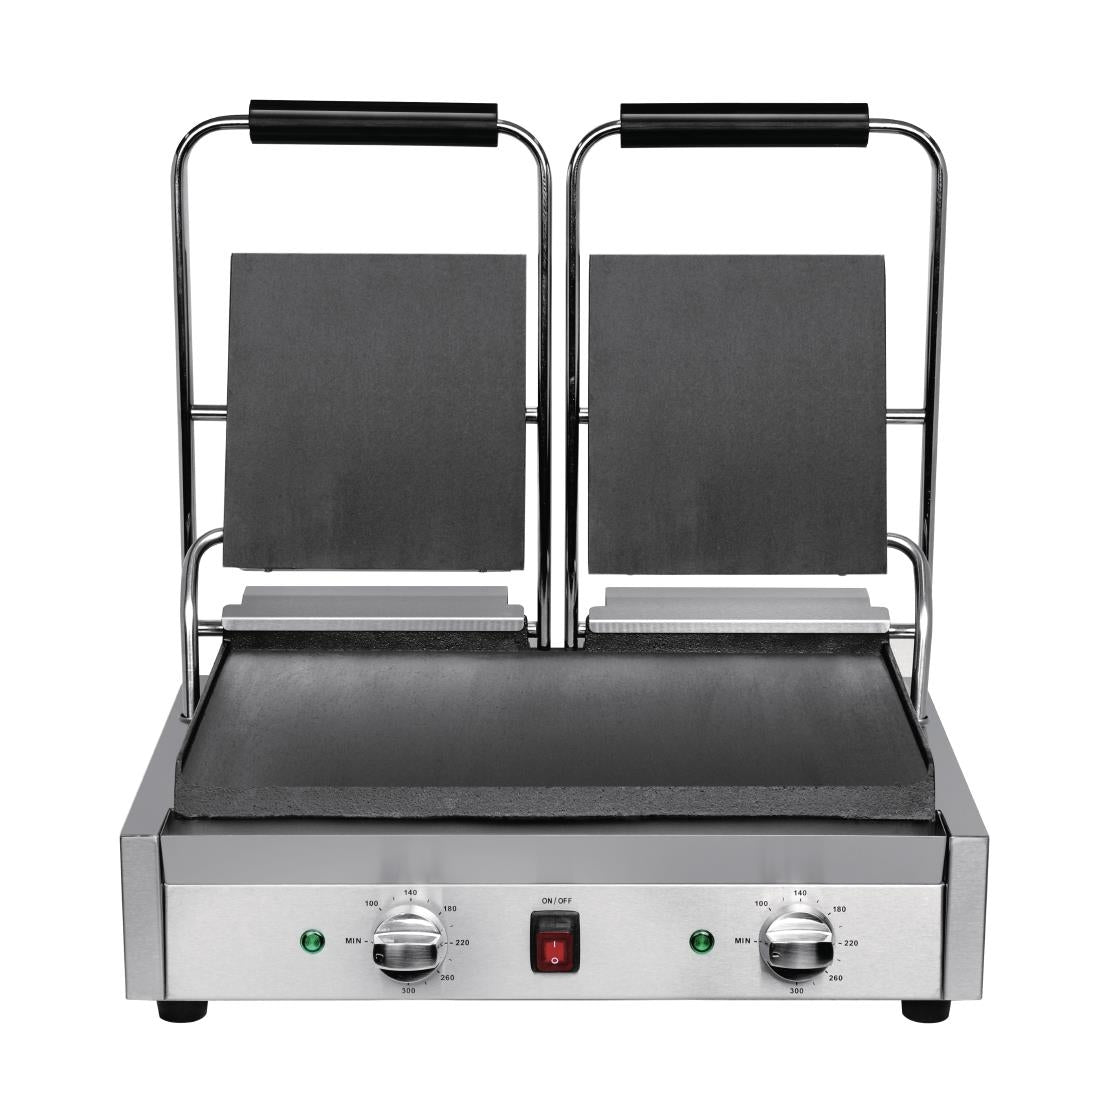 Apuro Bistro Double Contact Grill - Flat/Flat - 15amp